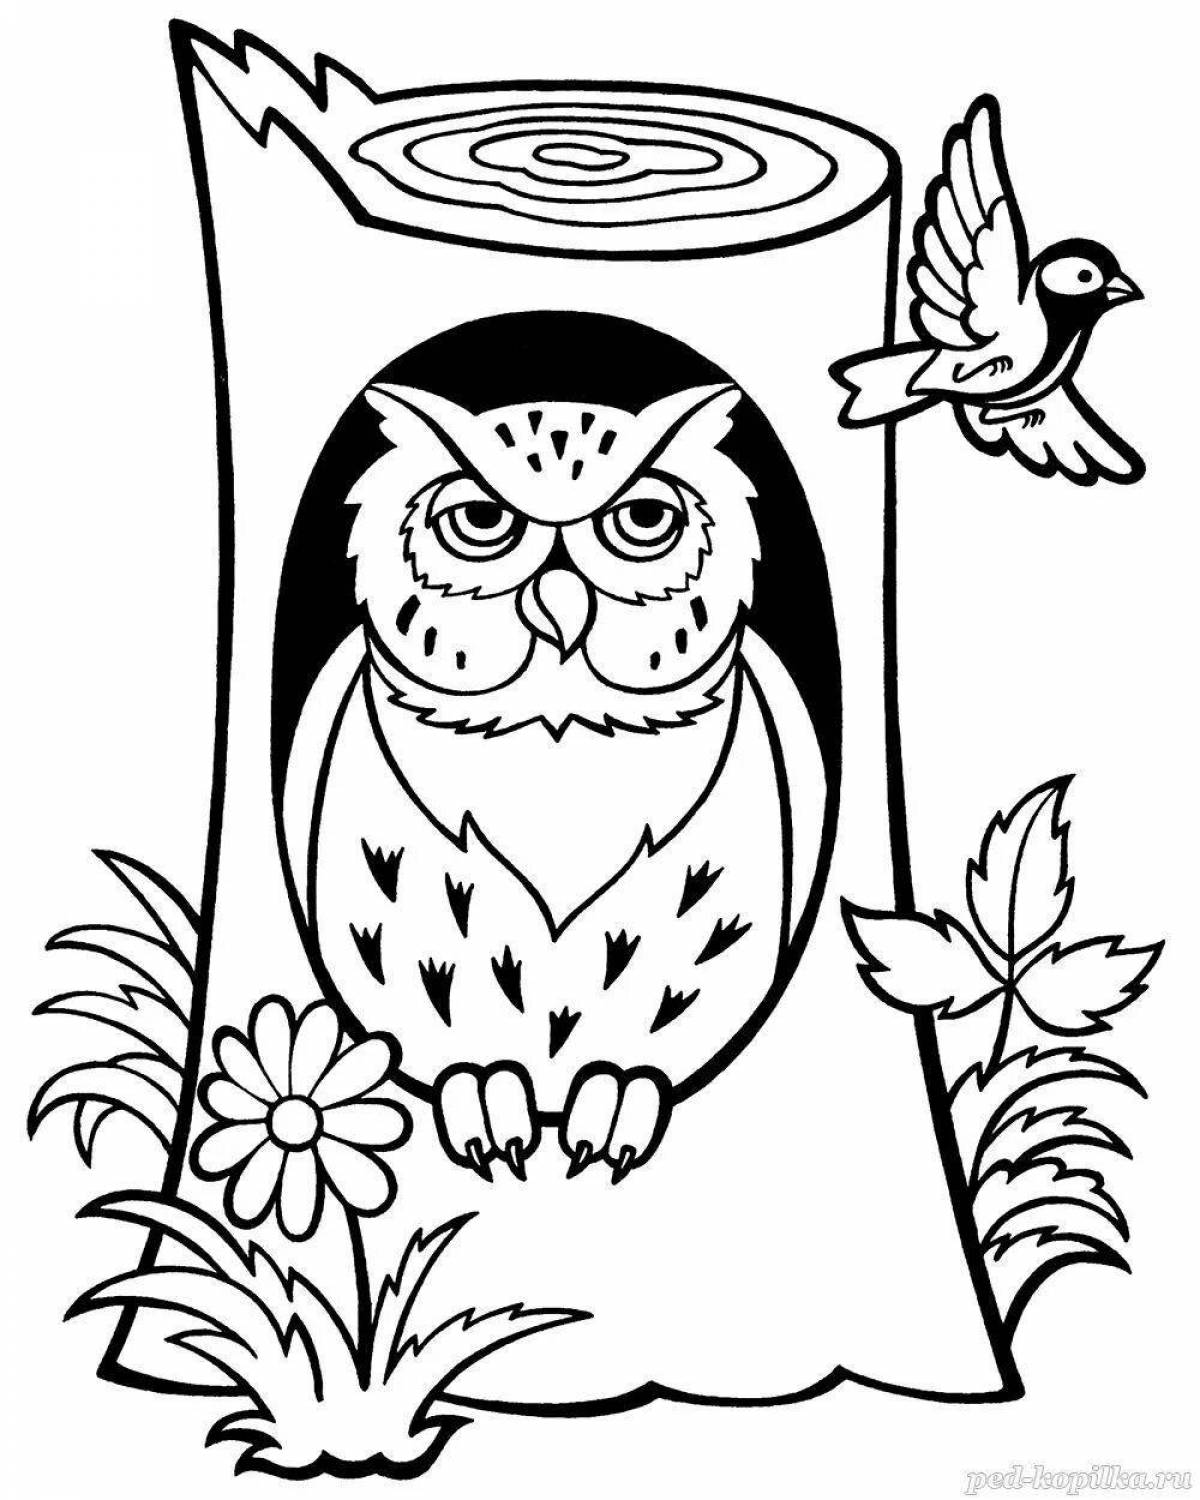 Owl in the hollow #14